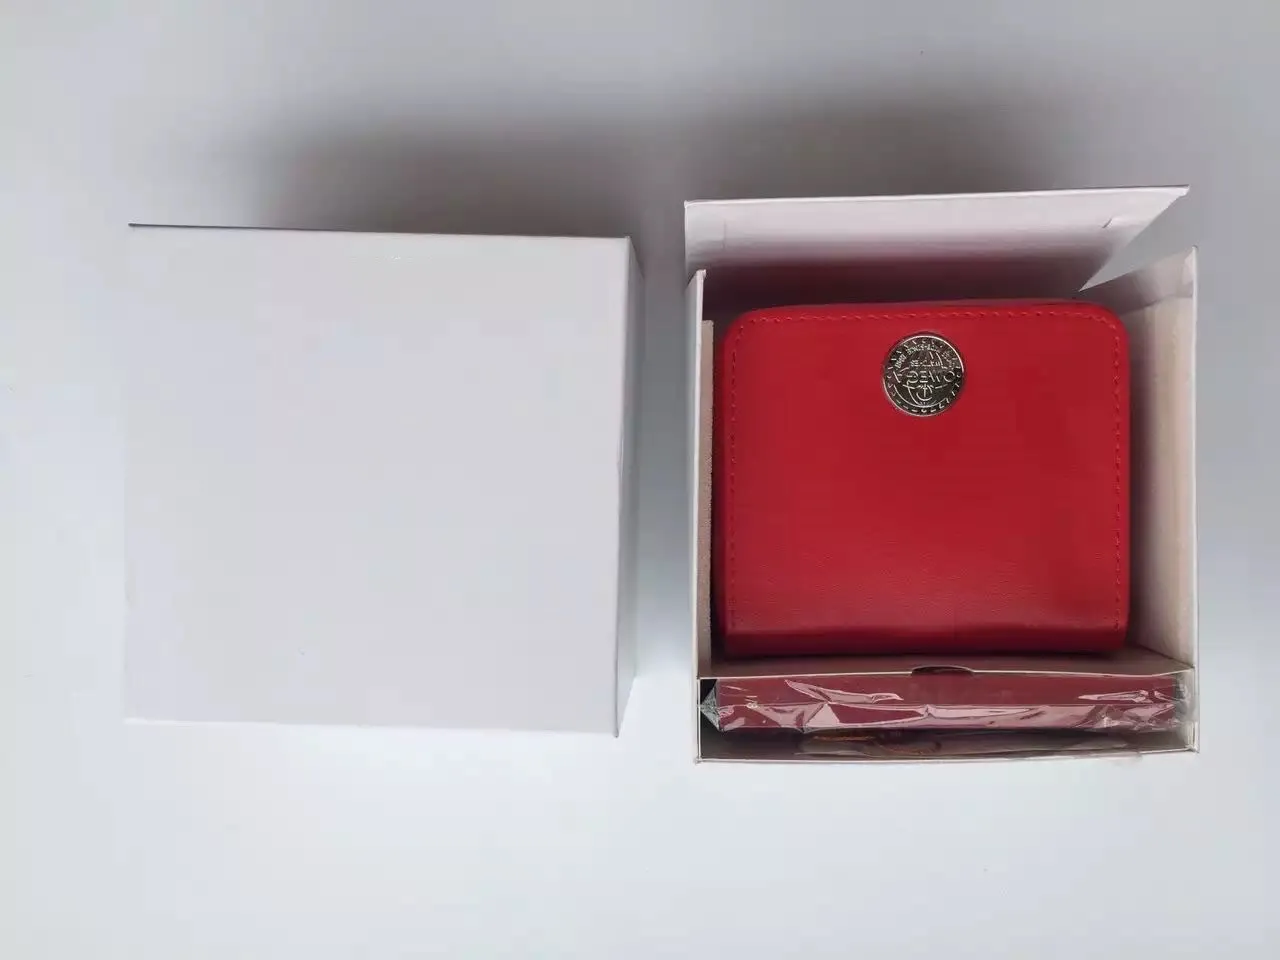 Luxury Watch Leatherette Red Original Boxes Papers With Handbag 210 30 42 20 01 001 Gift Boxes For Mens Ladies Watches232n